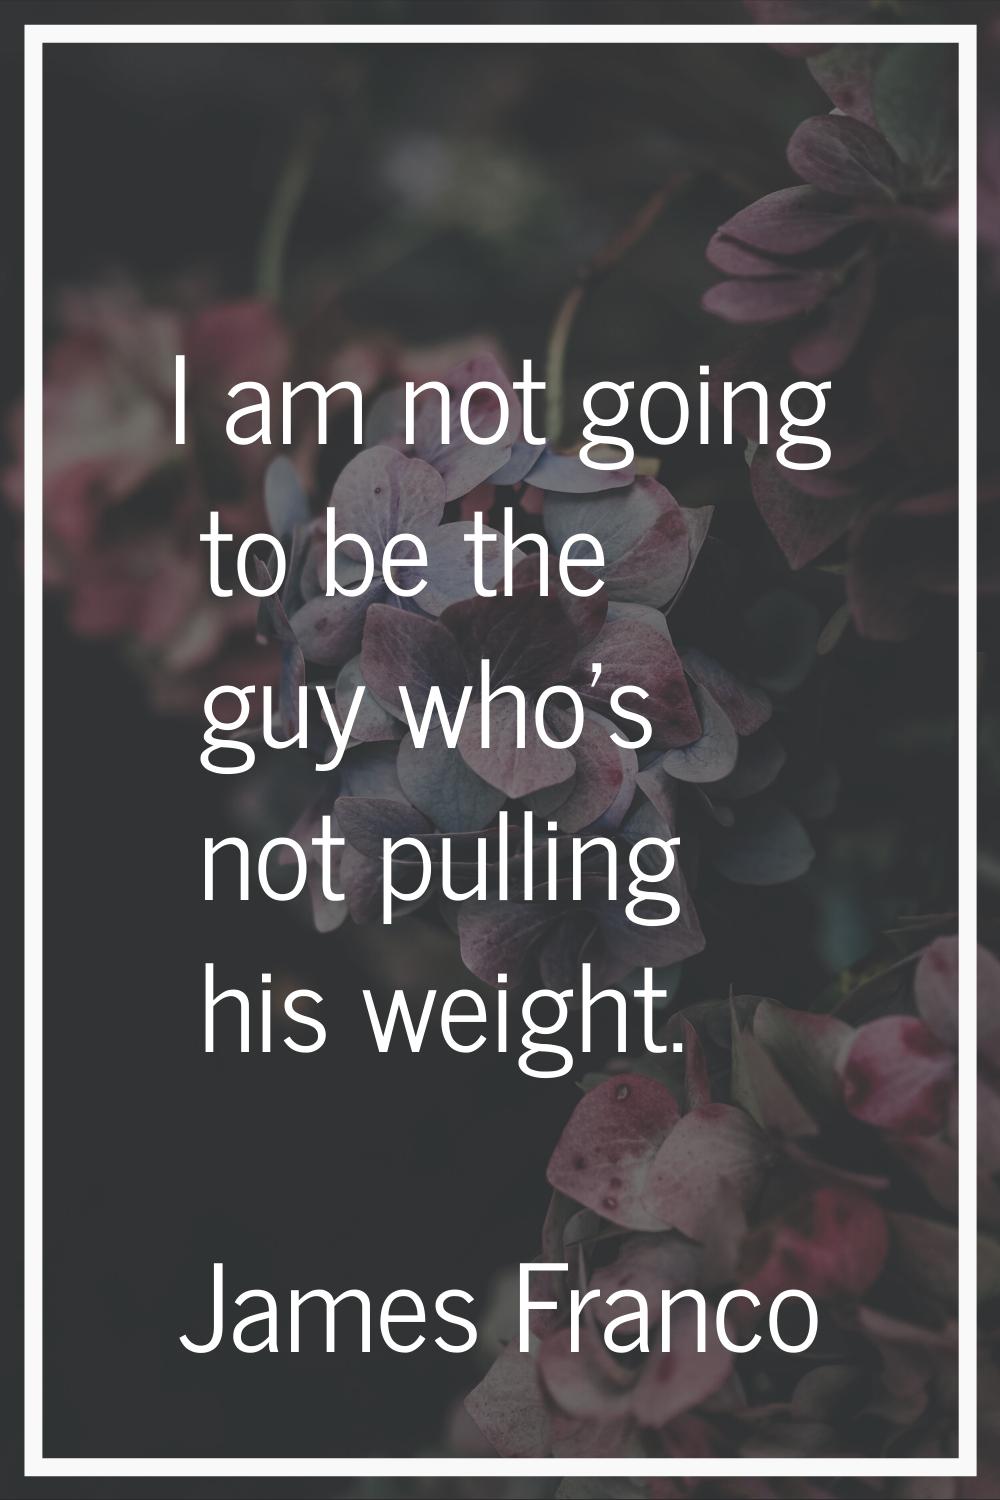 I am not going to be the guy who's not pulling his weight.